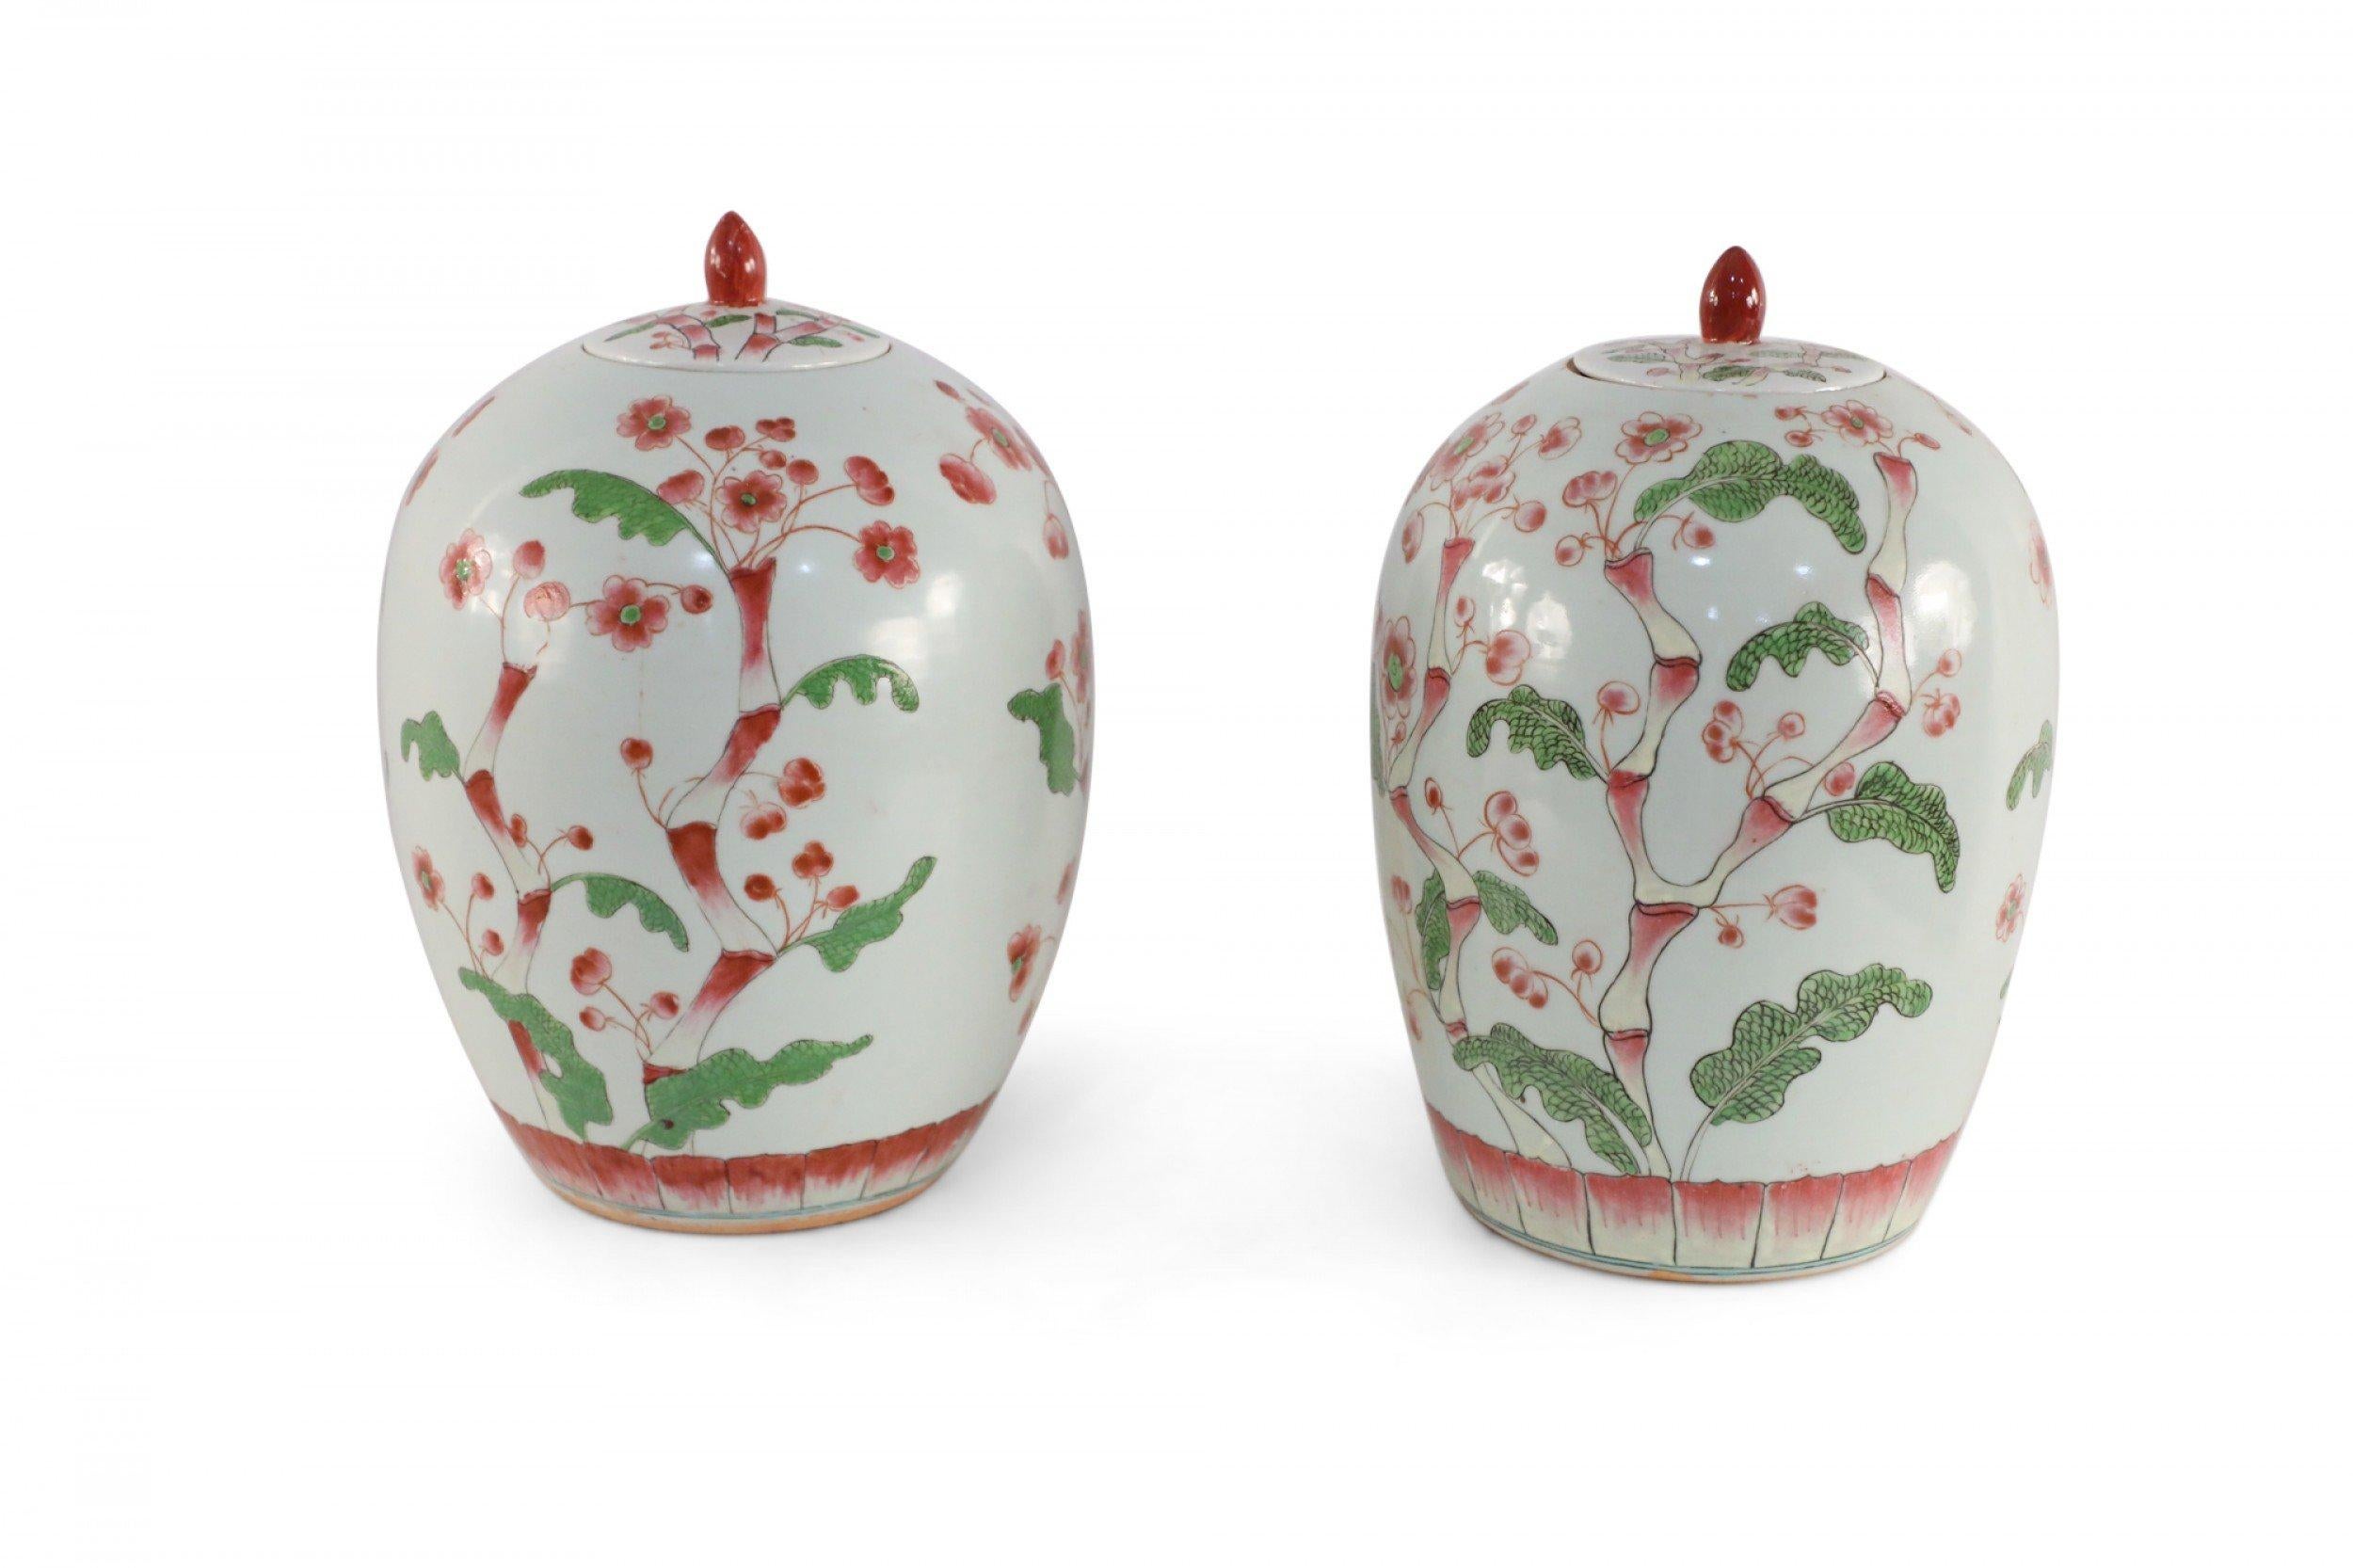 Chinese Export Pair of Chinese White and Pink Cherry Blossom Motif Lidded Porcelain Urns For Sale